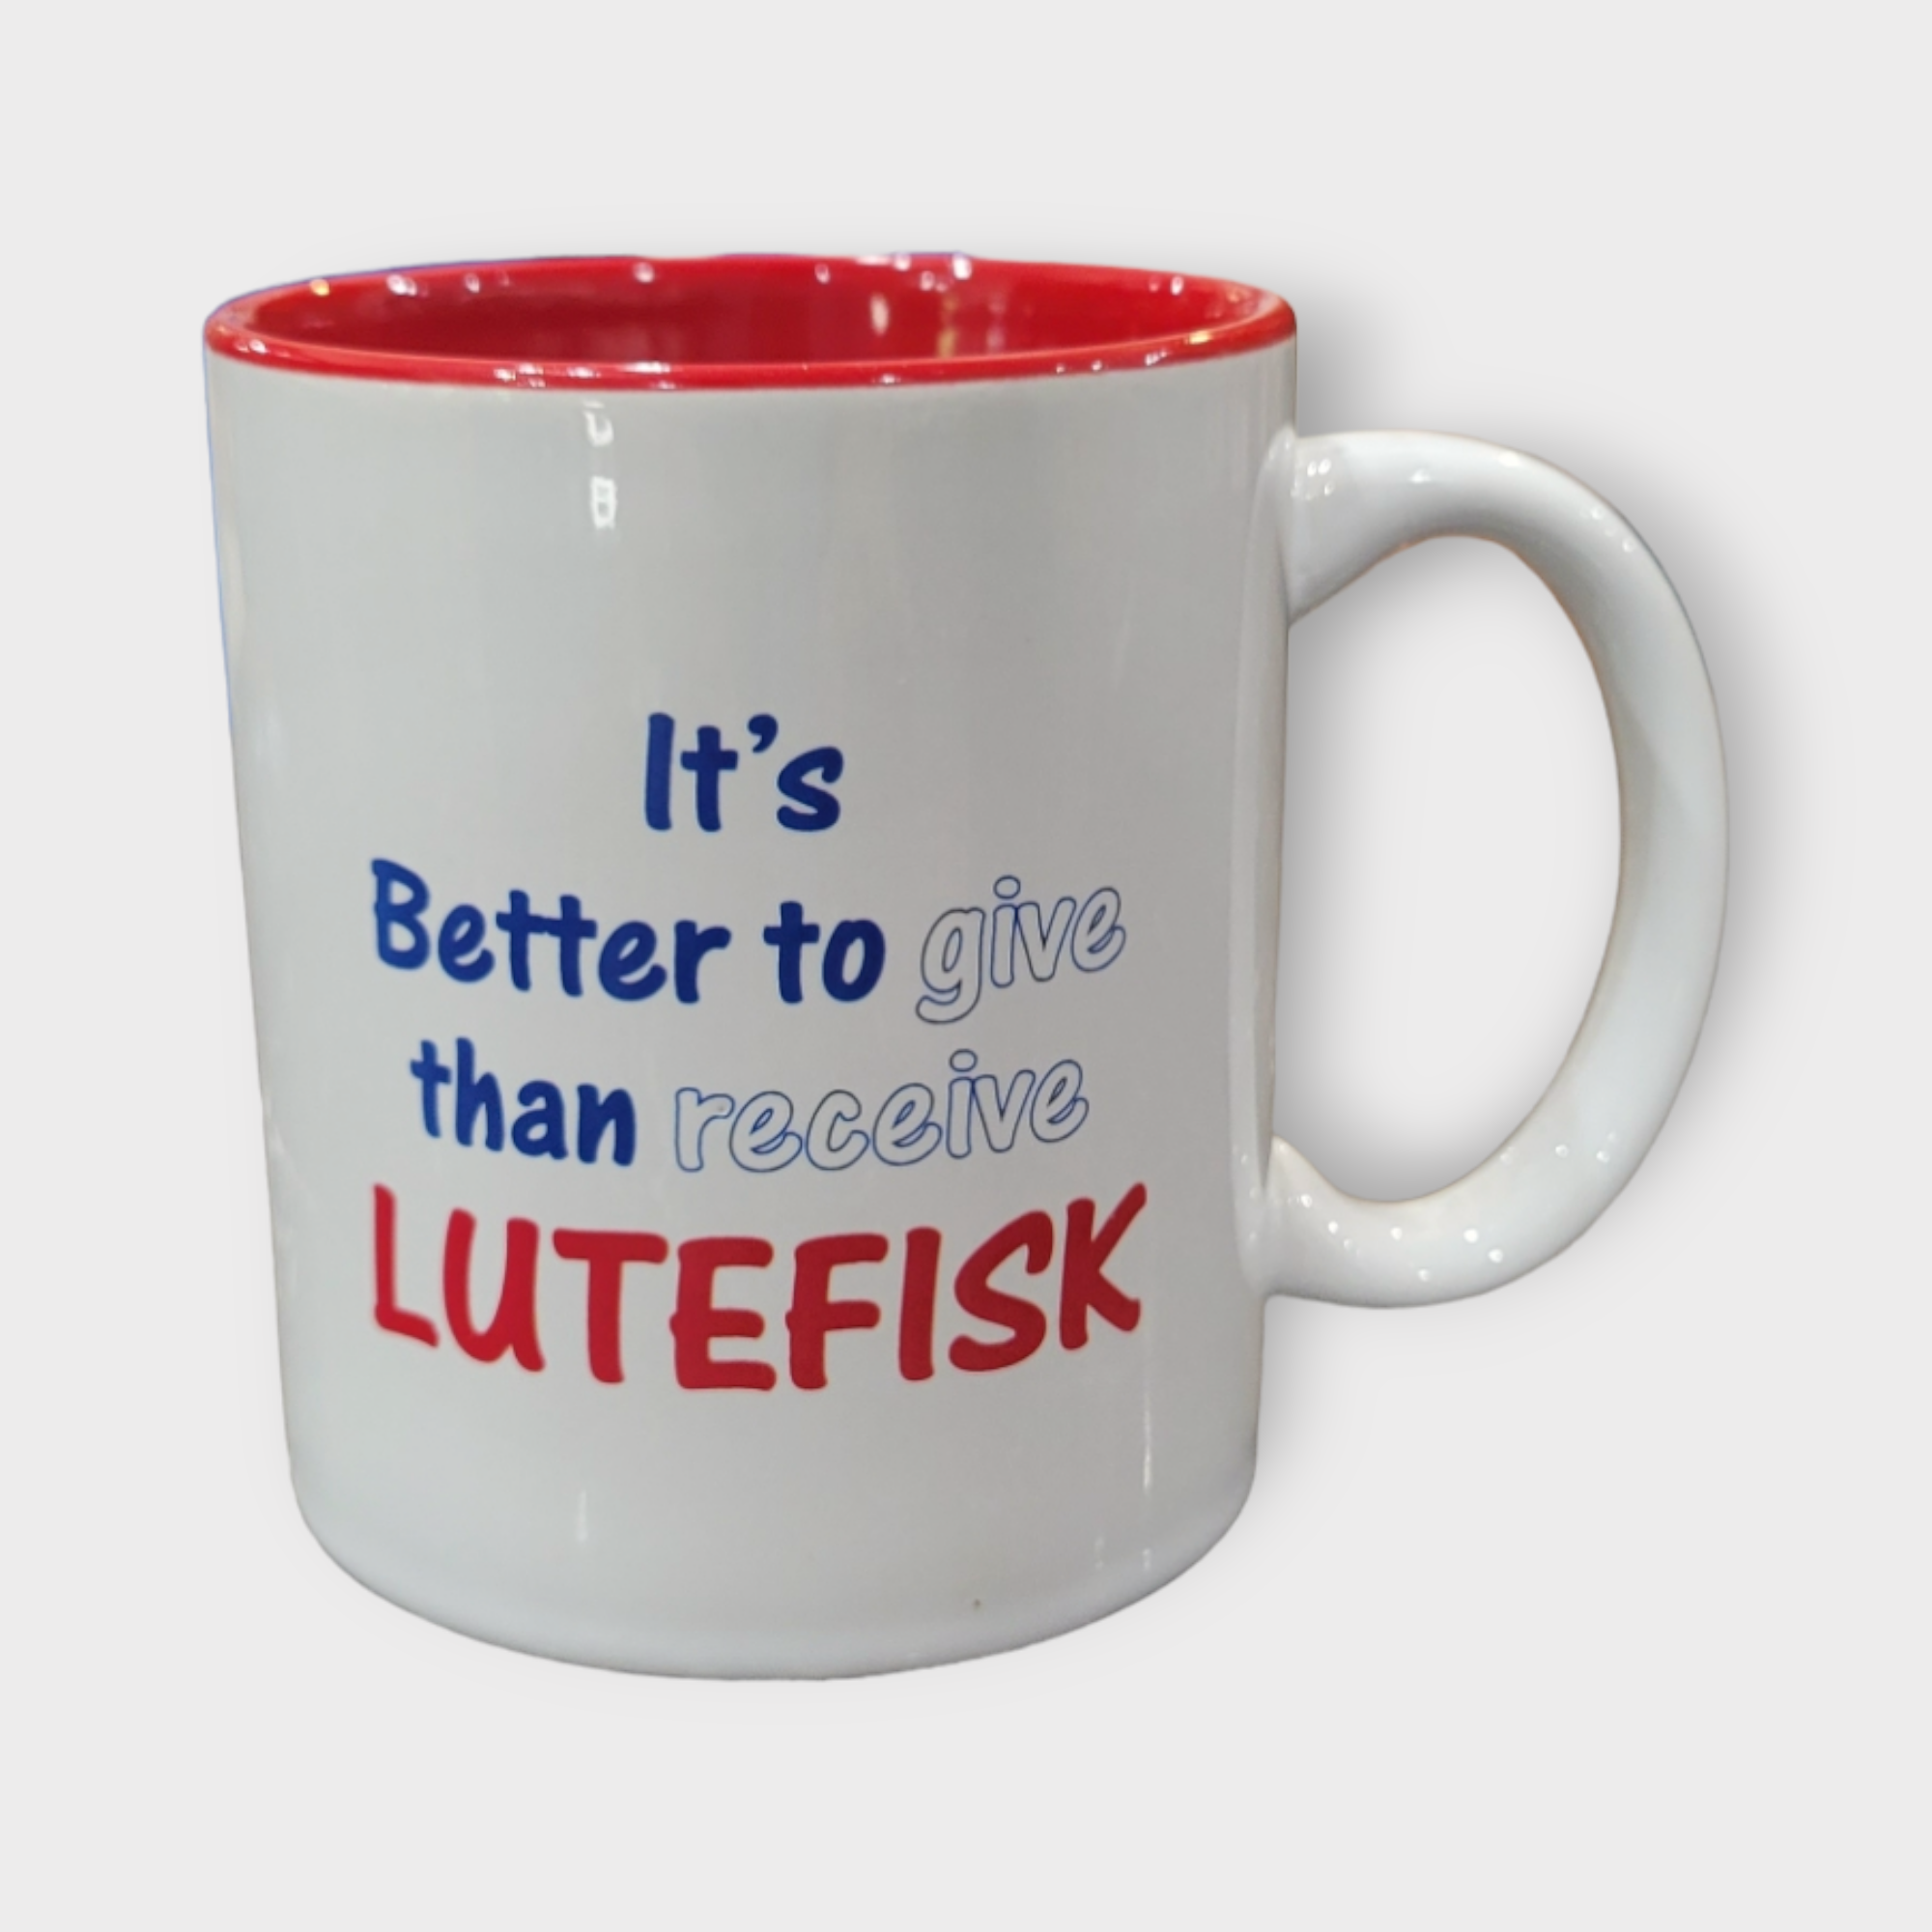 Mug: "Better to Give than Receive Lutefisk" (11oz)